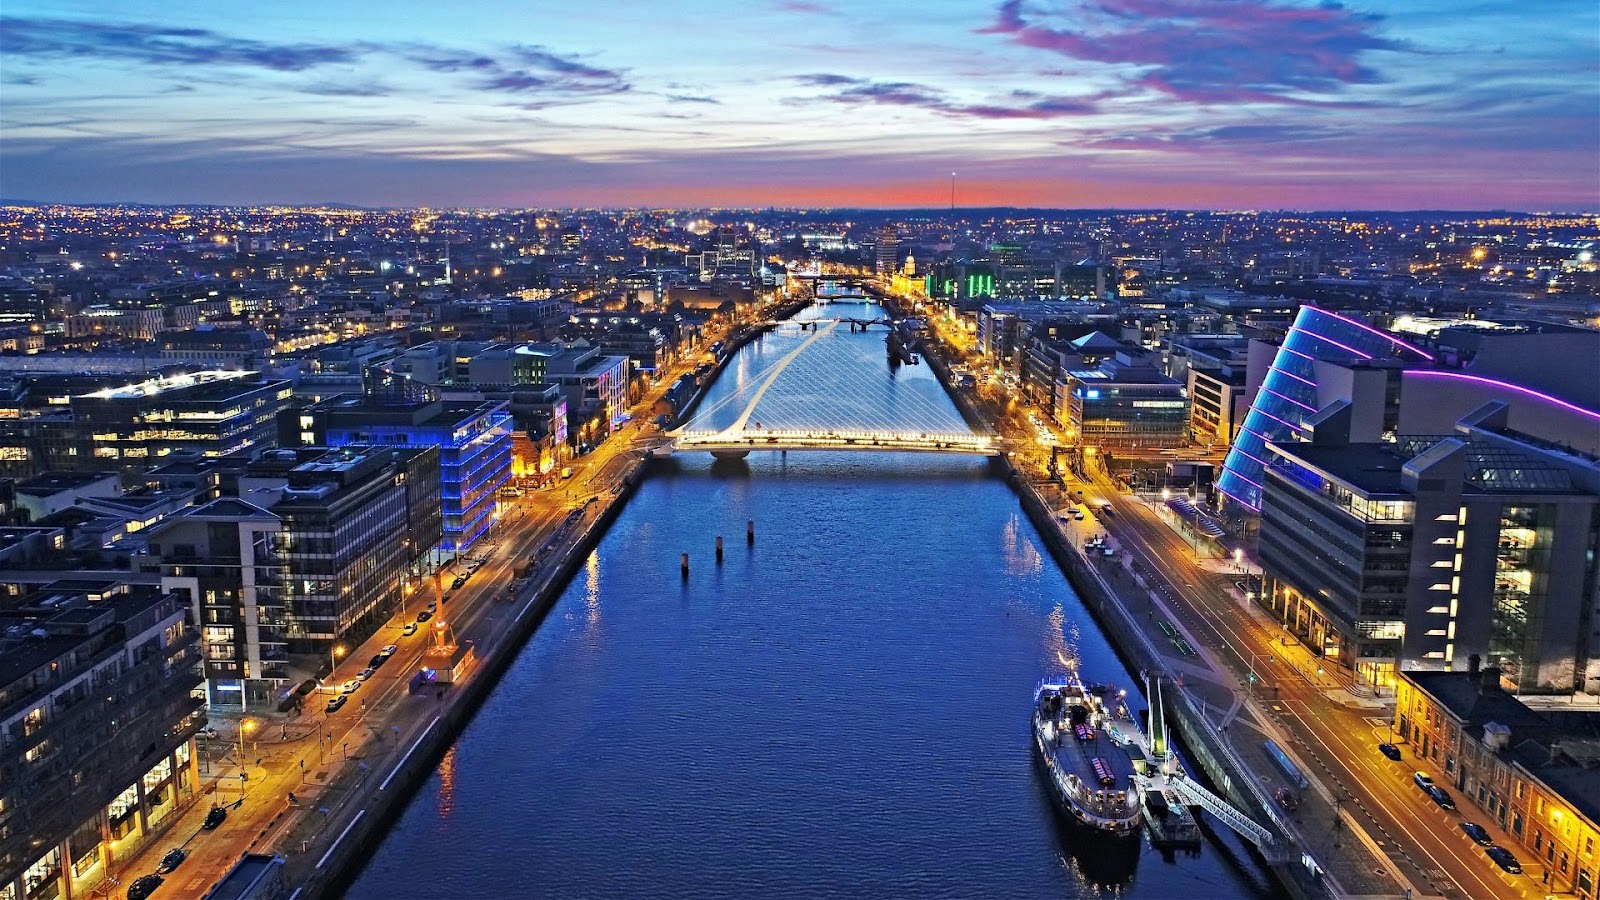 Best Vacation Spots for Couples - Dublin Ireland